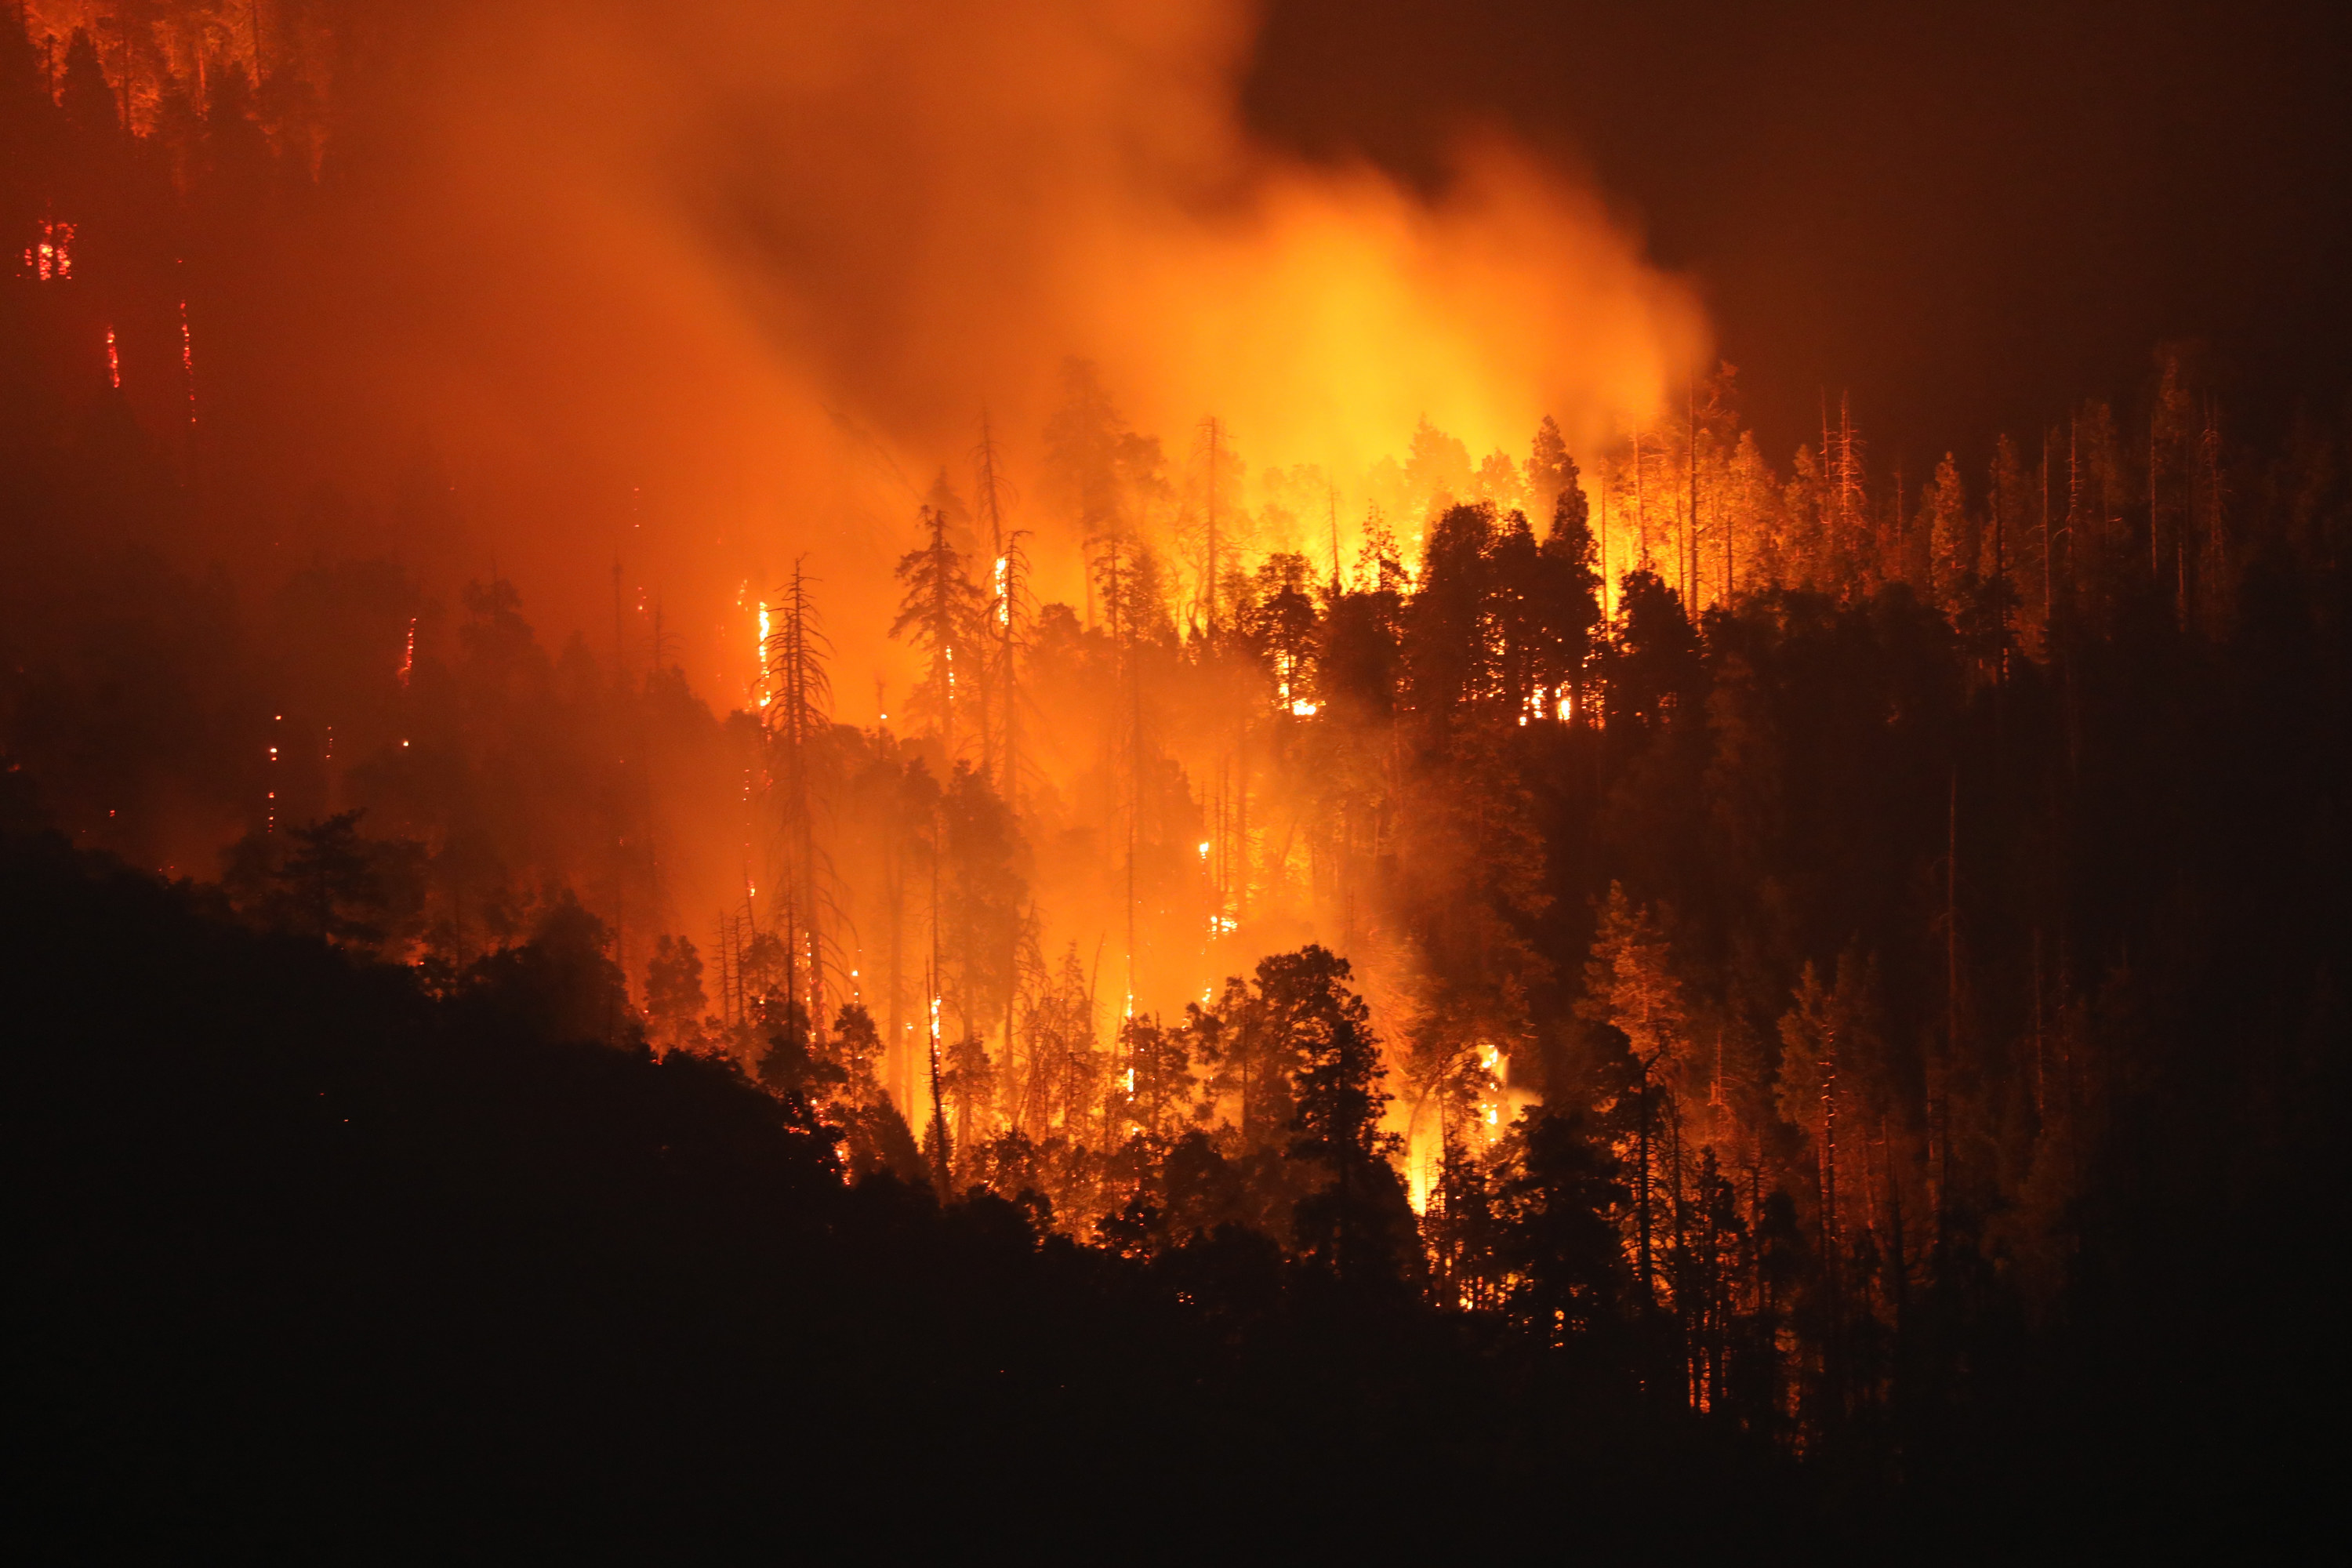 Burning trees from wildfires and smoke cover the landscape in California, U.S